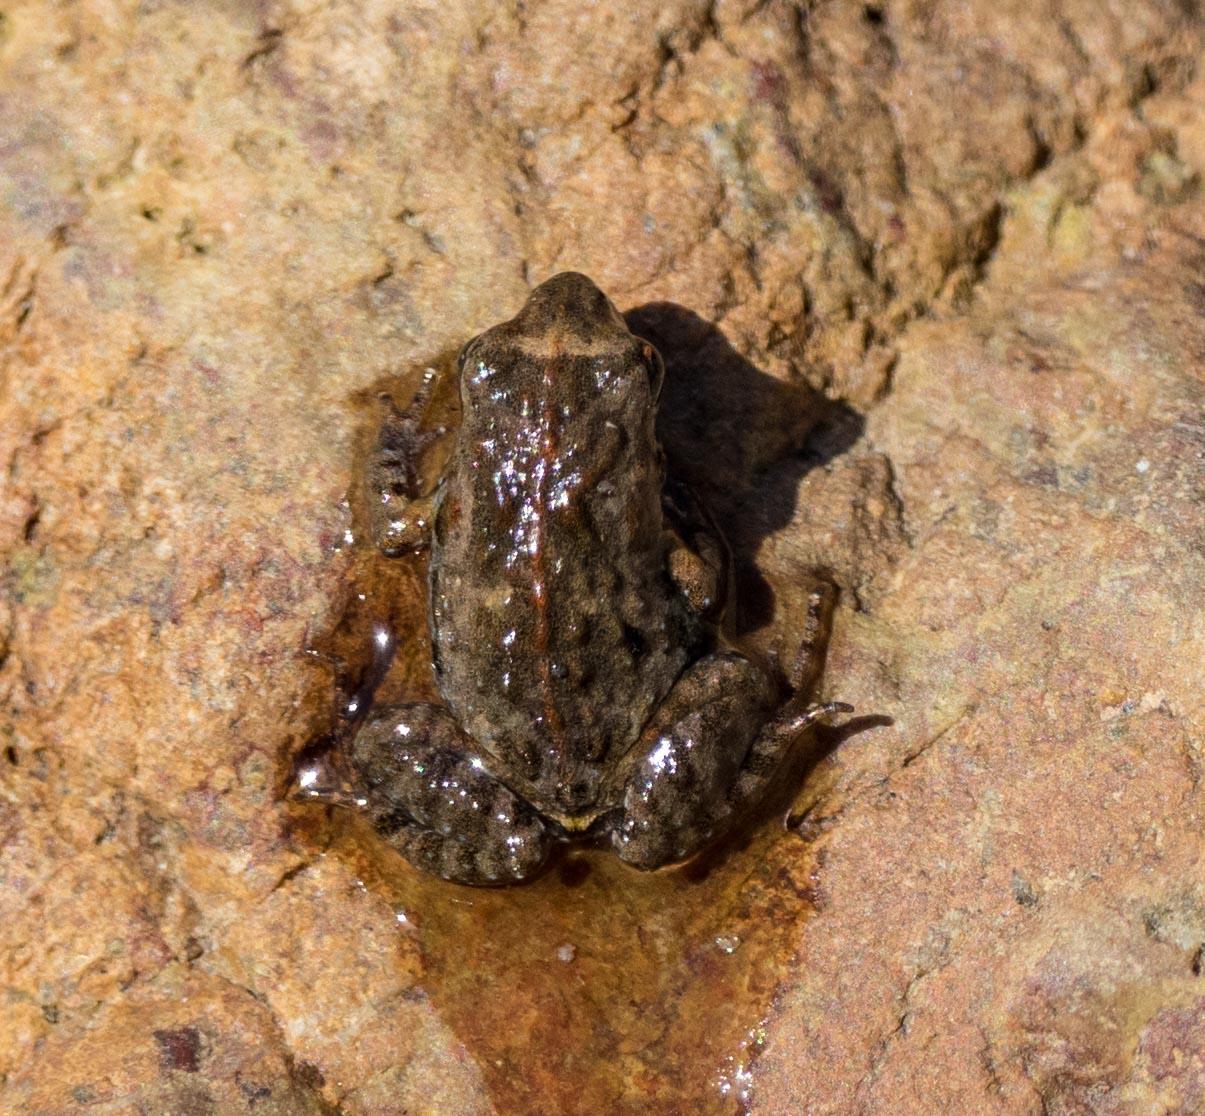 A Clicking Froglet froglet - exploring the terrestrial side of his amphibious world.